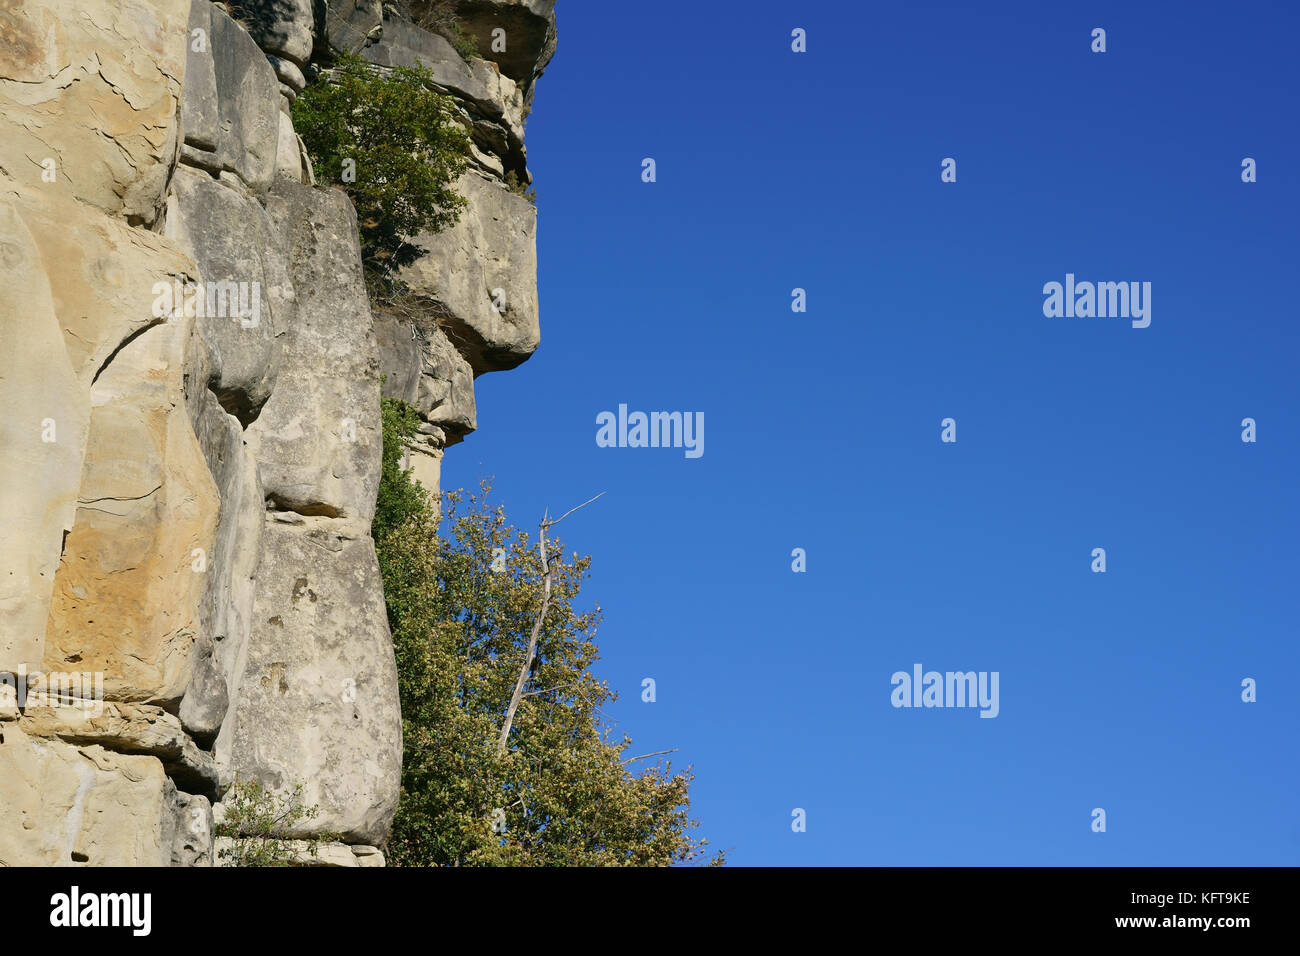 Natural sandstone rock formation looking like a man's profile. Annot, Alpes de Haute-Provence, France. Stock Photo